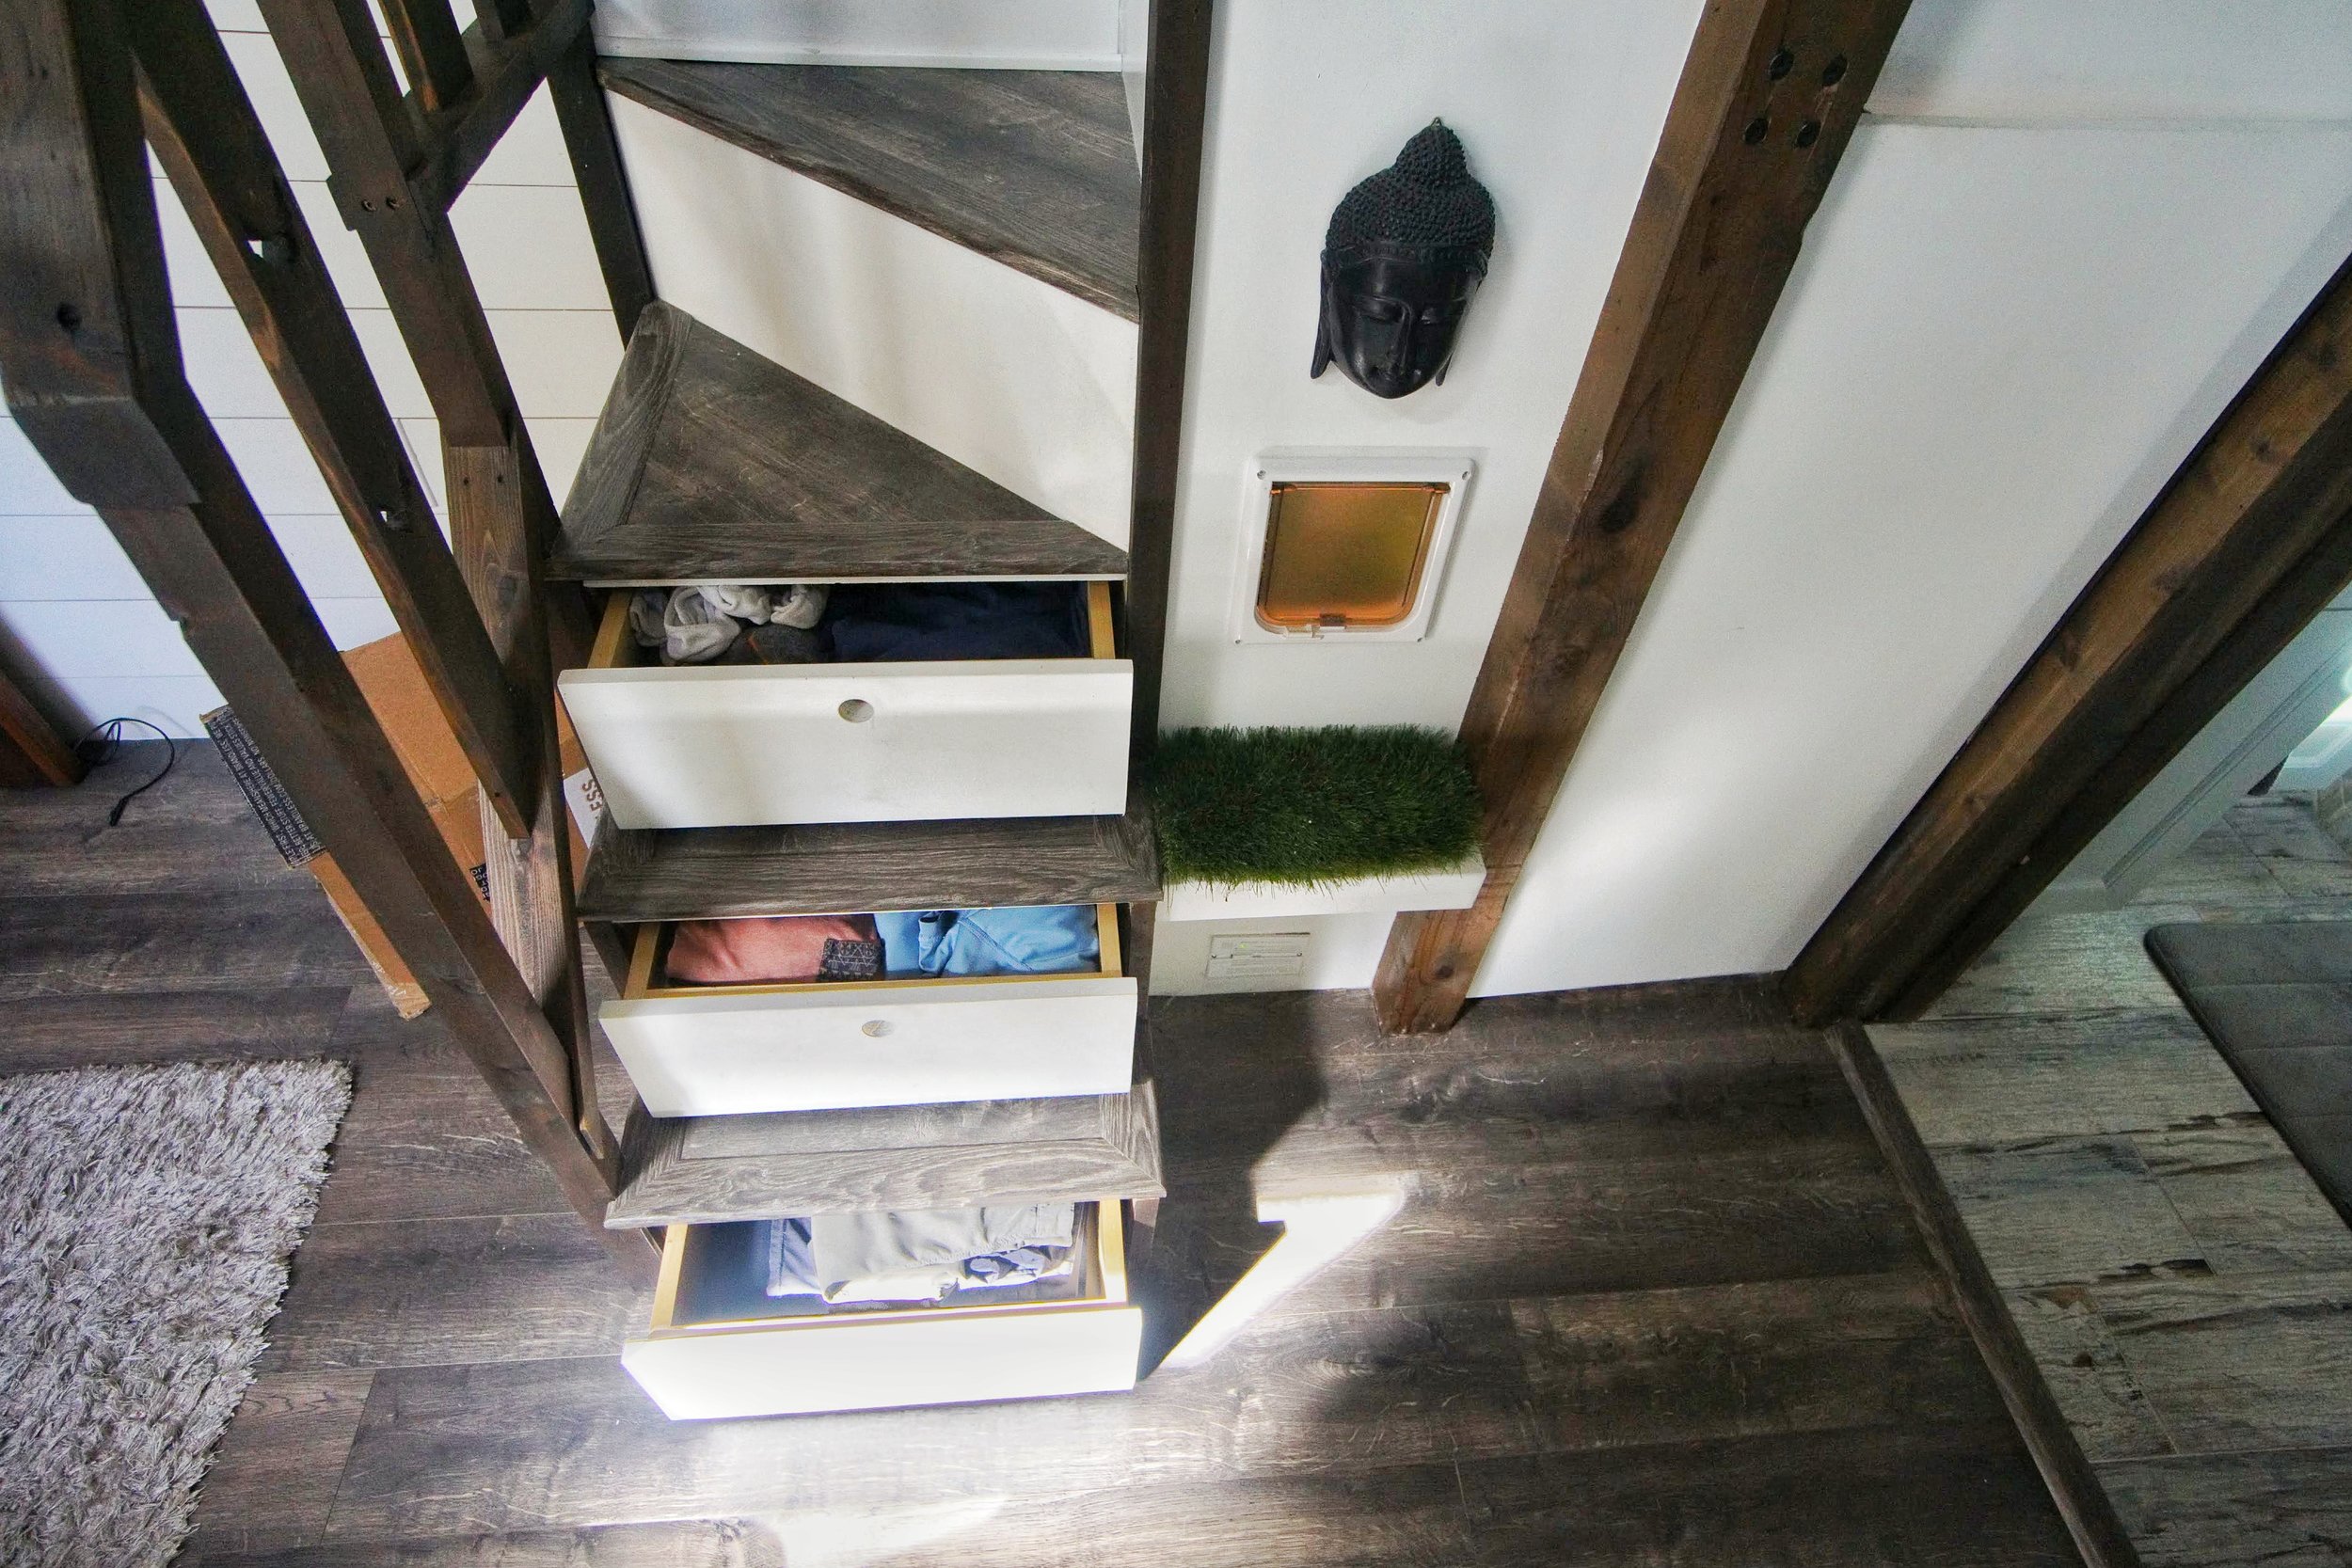 Efficient Tiny Home Storage Ideas to Maximize Space